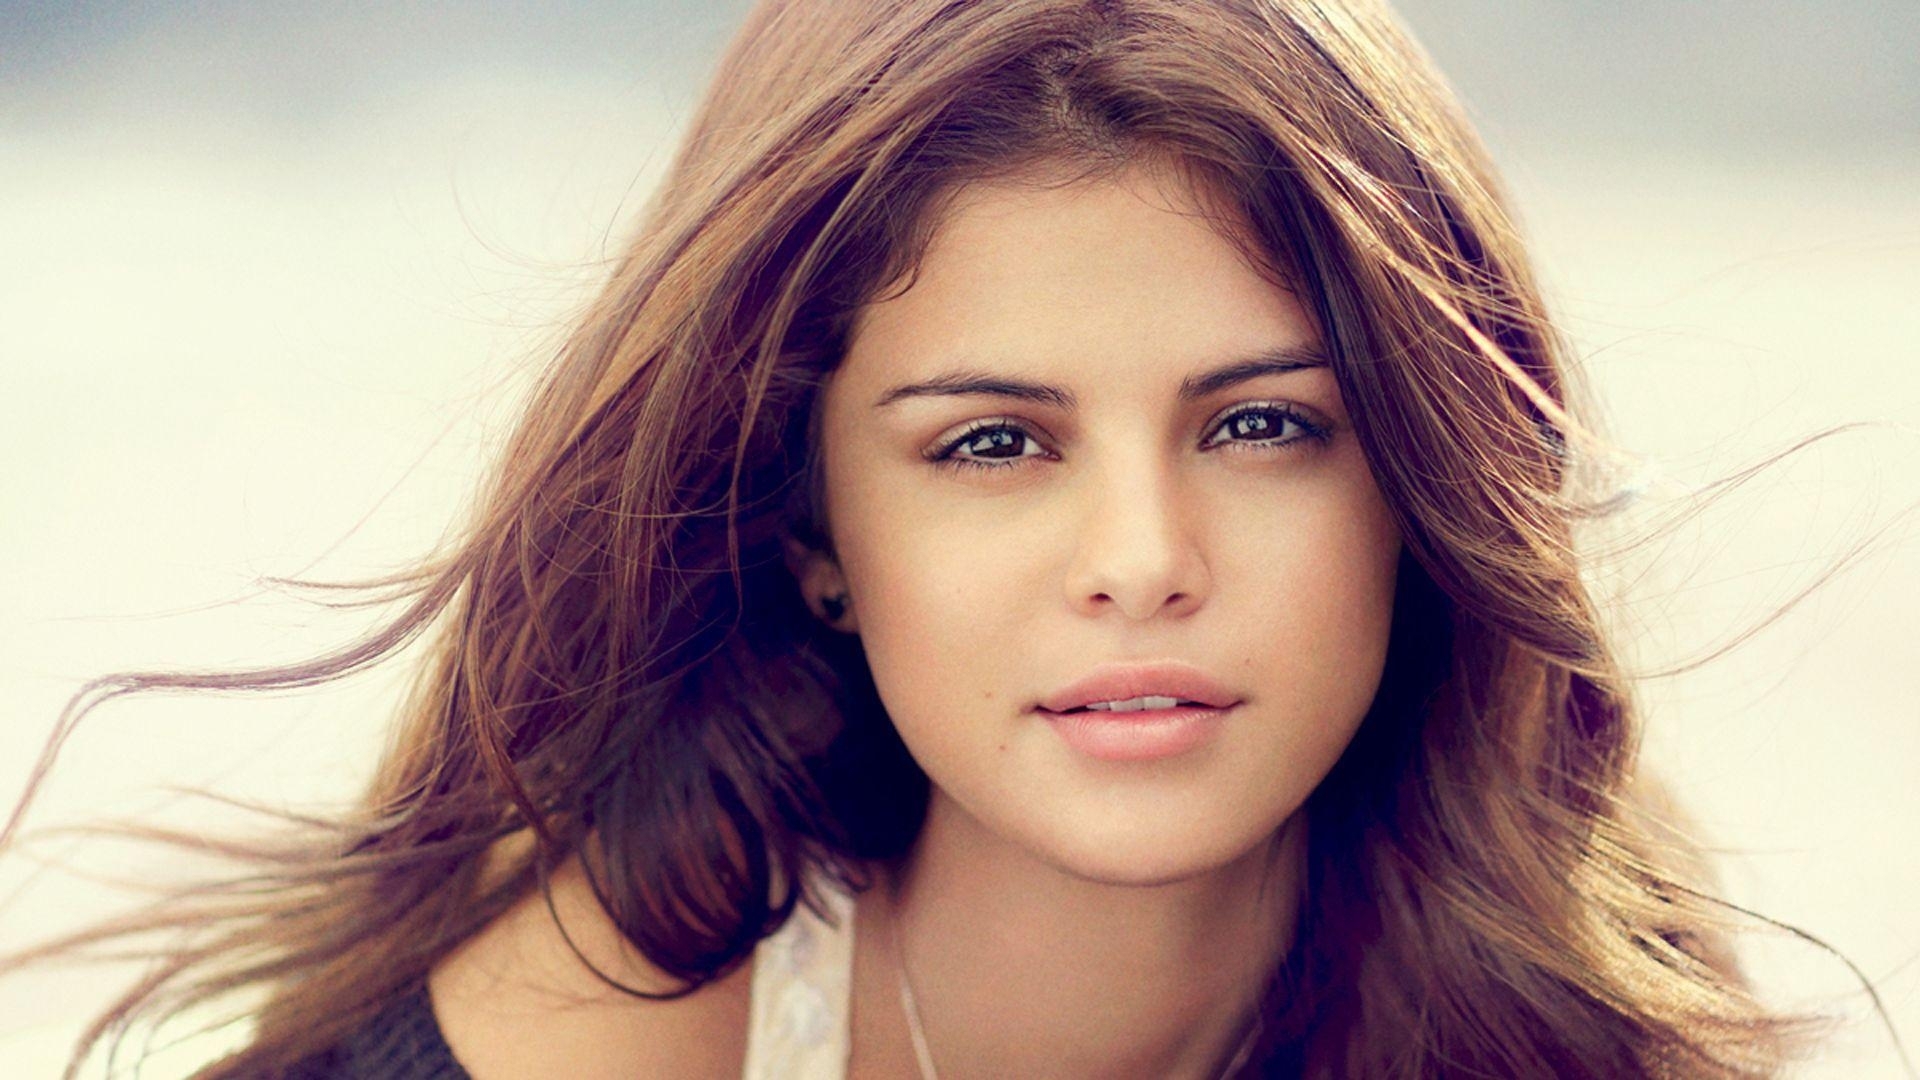 10 Top Selena Gomez Hd Pic FULL HD 1080p For PC Background